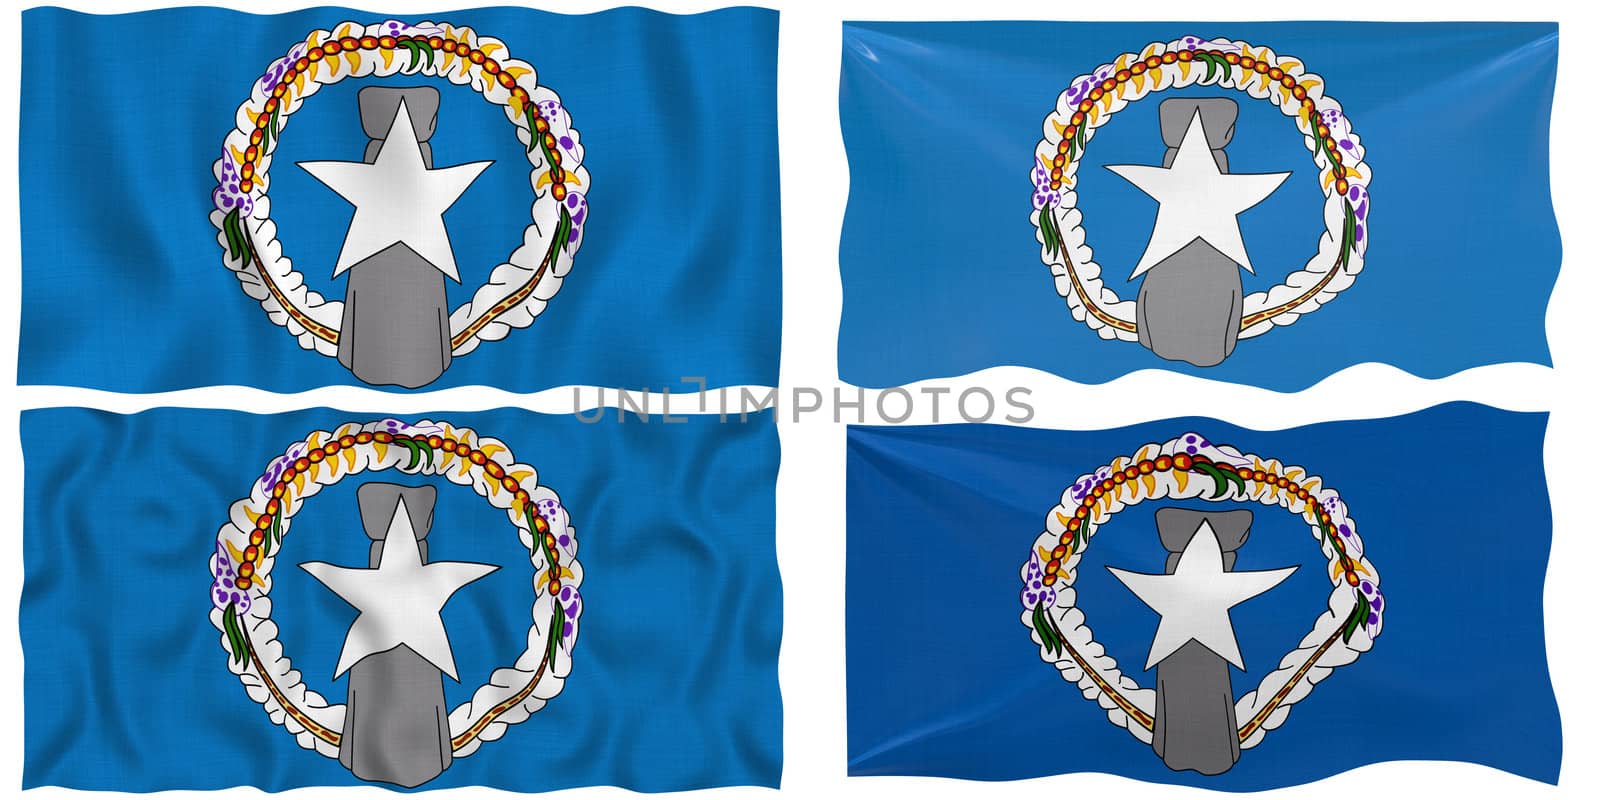 Great Image of the Flag of Northern Mariana Islands